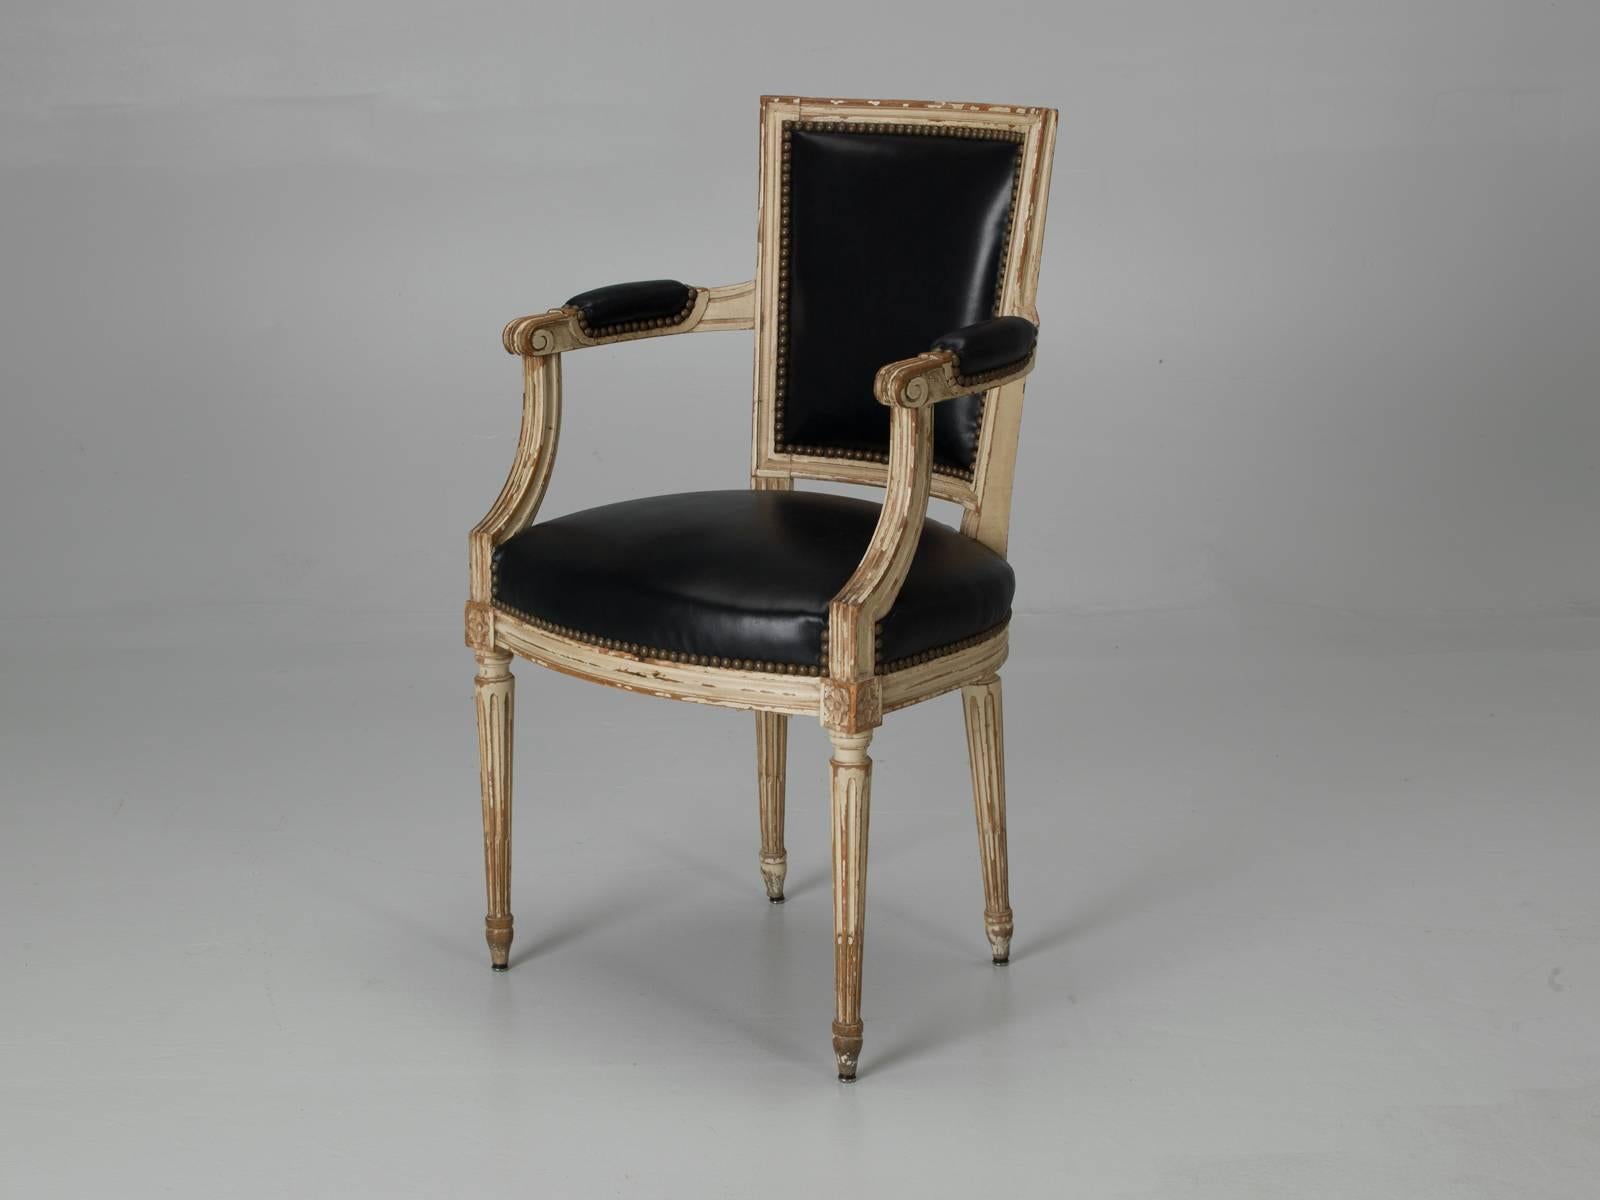 Early 20th Century Antique Louis XVI Style French Dining Chairs in Original Paint and Black Leather